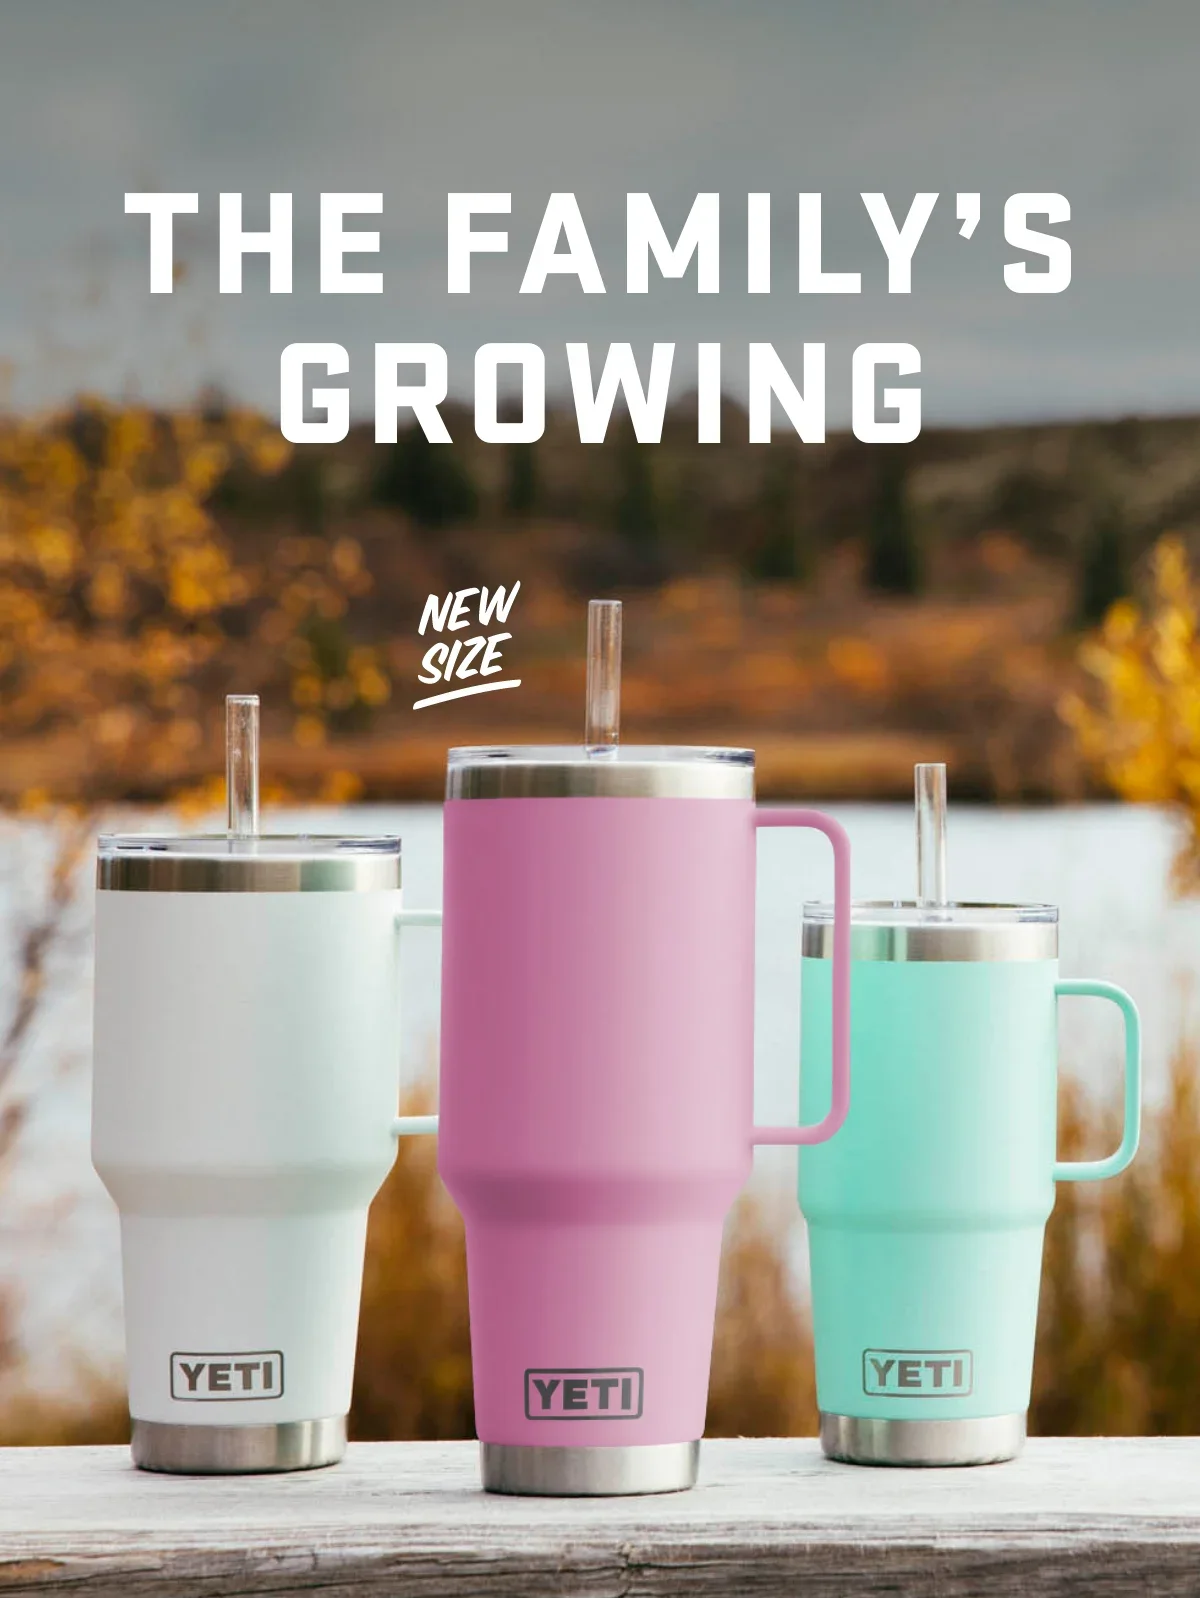 YETI: The Family's Growing